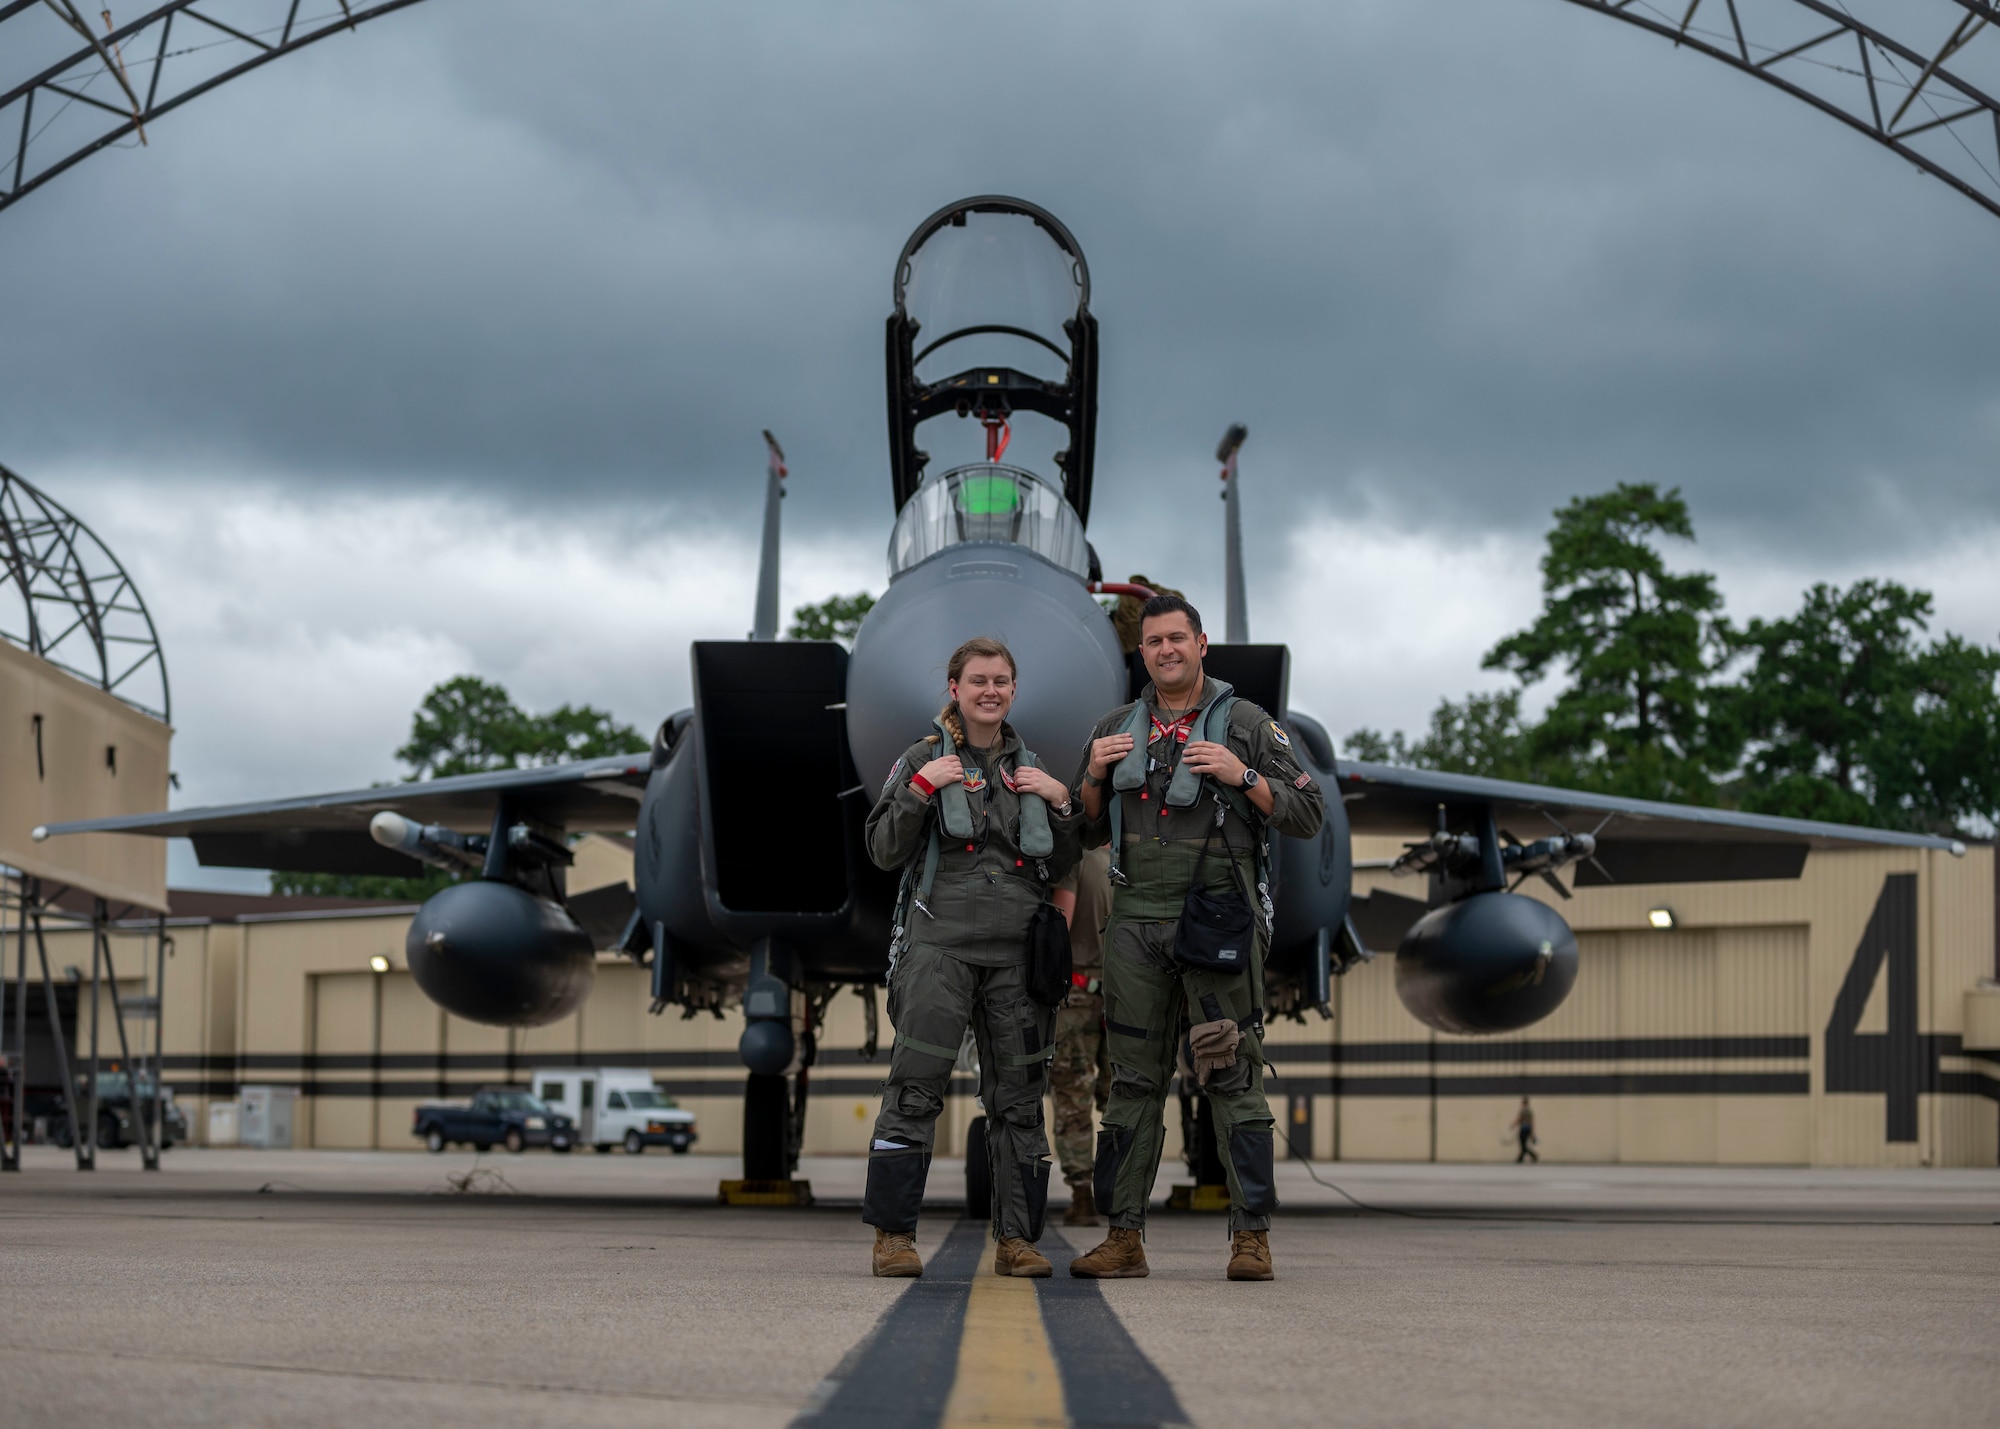 Capt. Lauren Schlichting, left, 333rd Fighter Squadron evaluating pilot and executive officer, and Capt. Andrew Lombardo, 333rd FS weapons system officer, pose for a photo at Seymour Johnson Air Force Base, North Carolina, August 4, 2021.